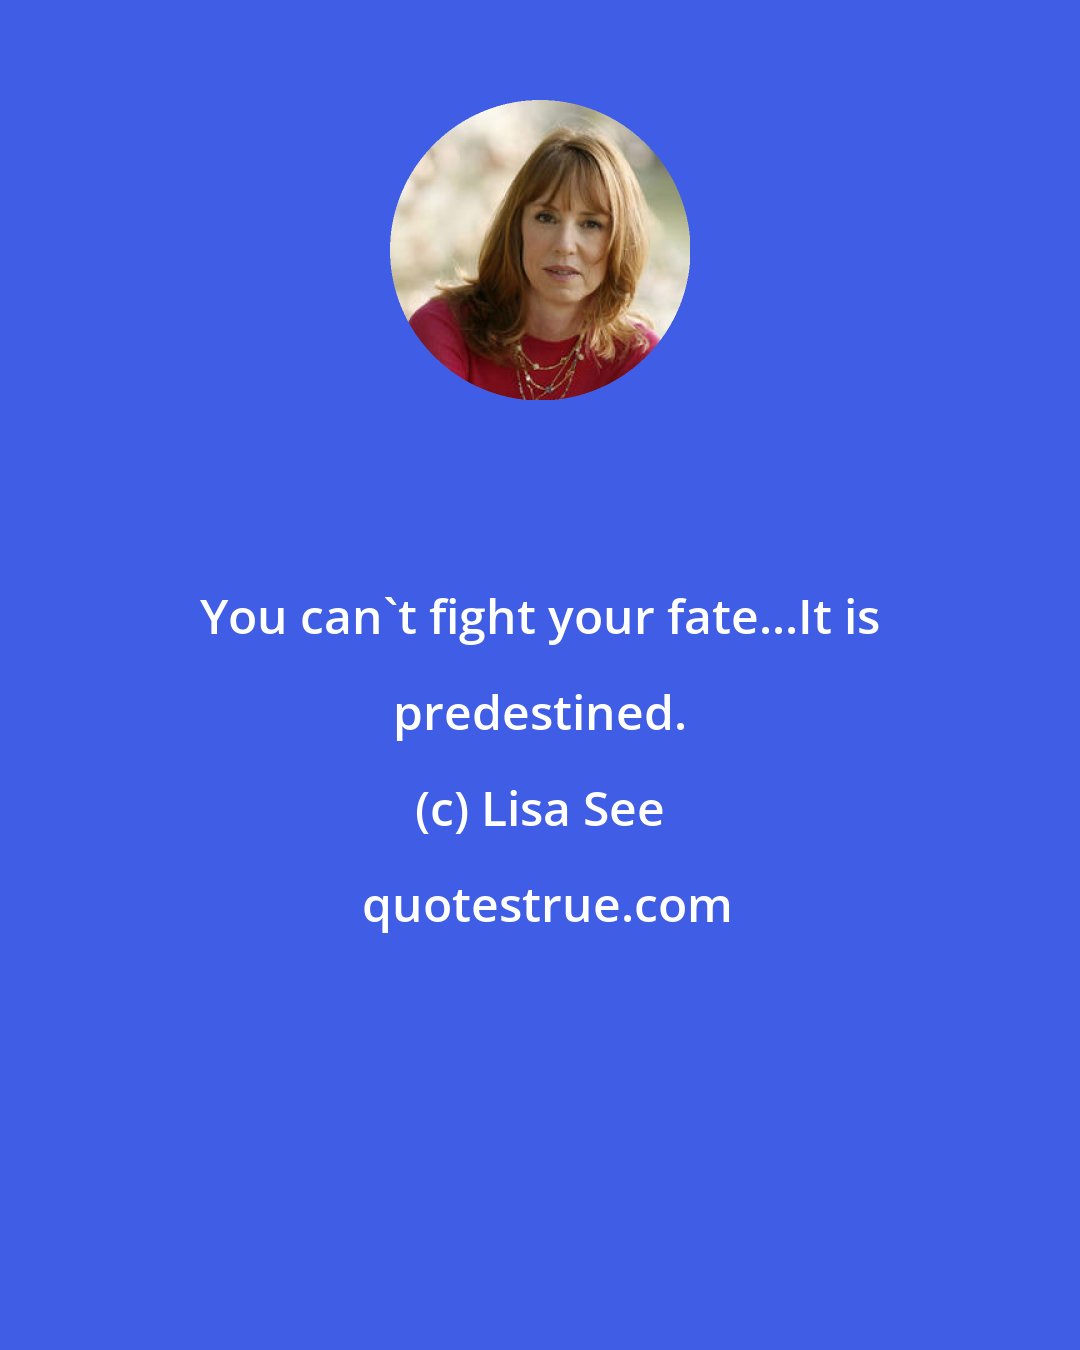 Lisa See: You can't fight your fate...It is predestined.